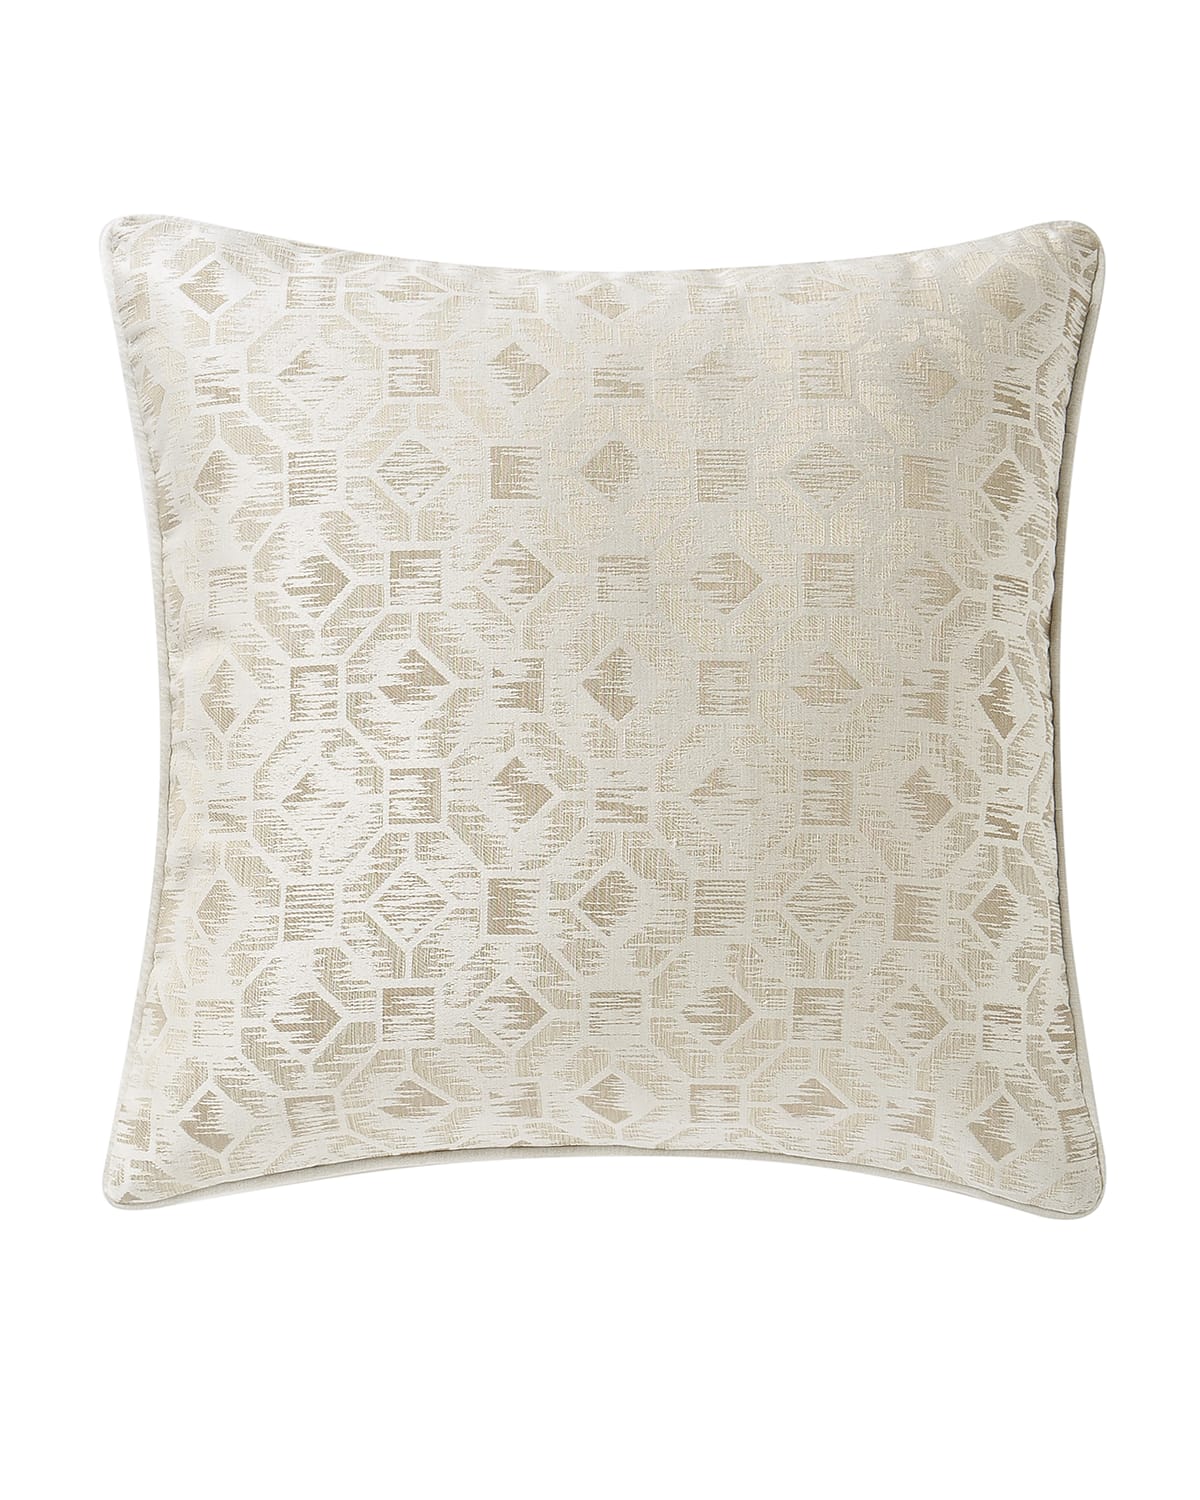 Image Waterford Lancaster Square Decorative Pillow, 18"Sq.